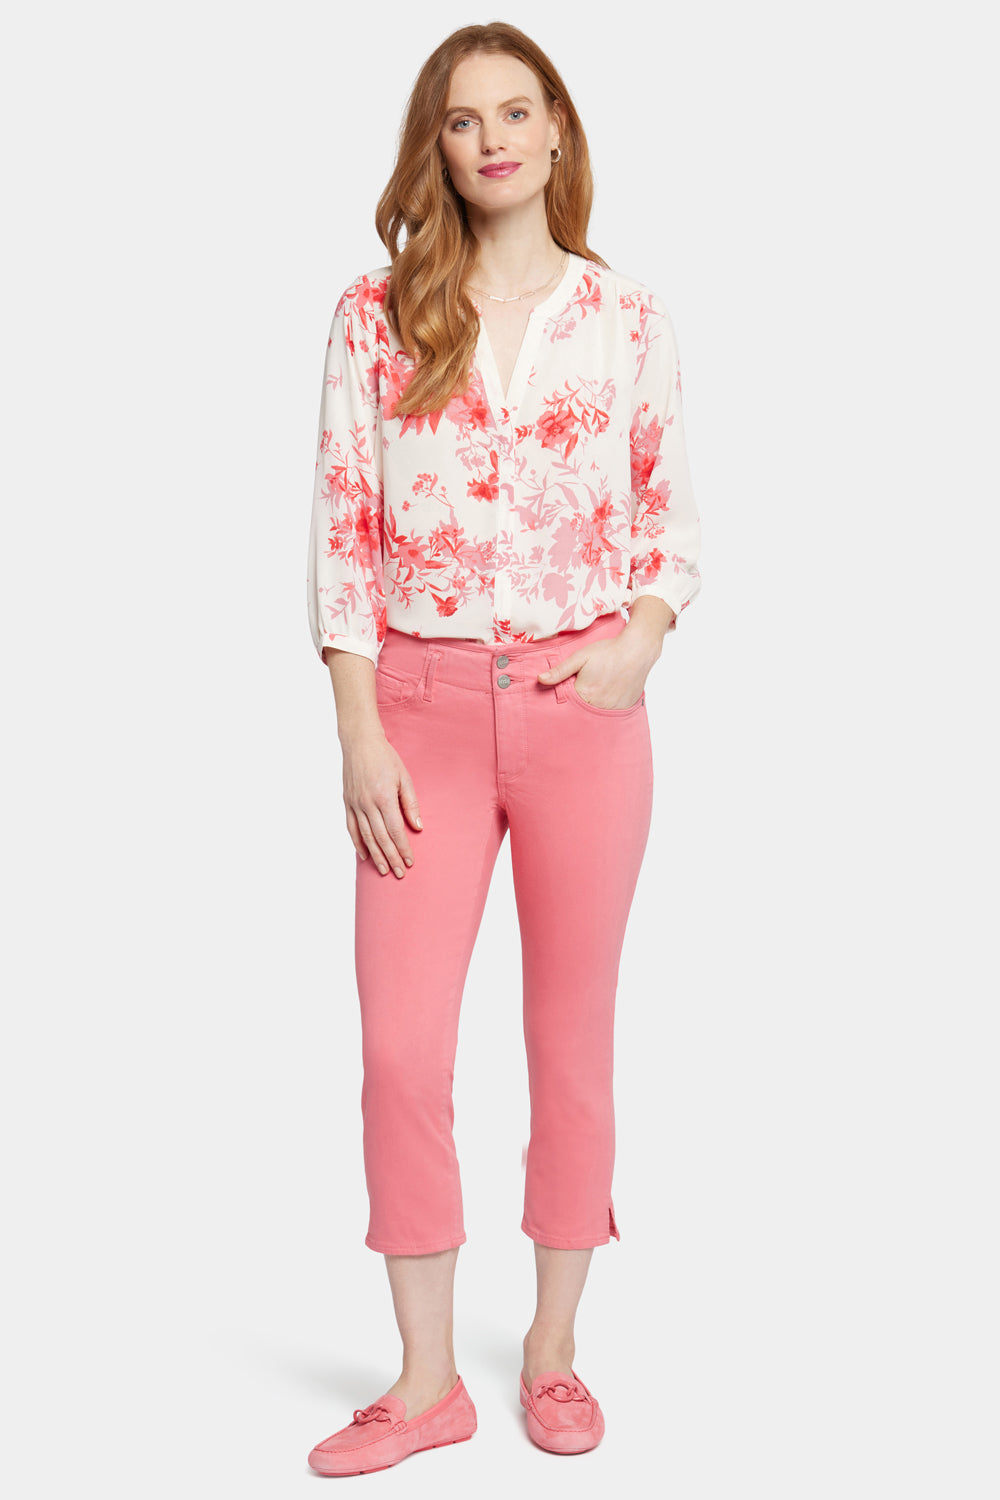 Chloe Capri Jeans With Side Slits - Pink Punch Pink | NYDJ